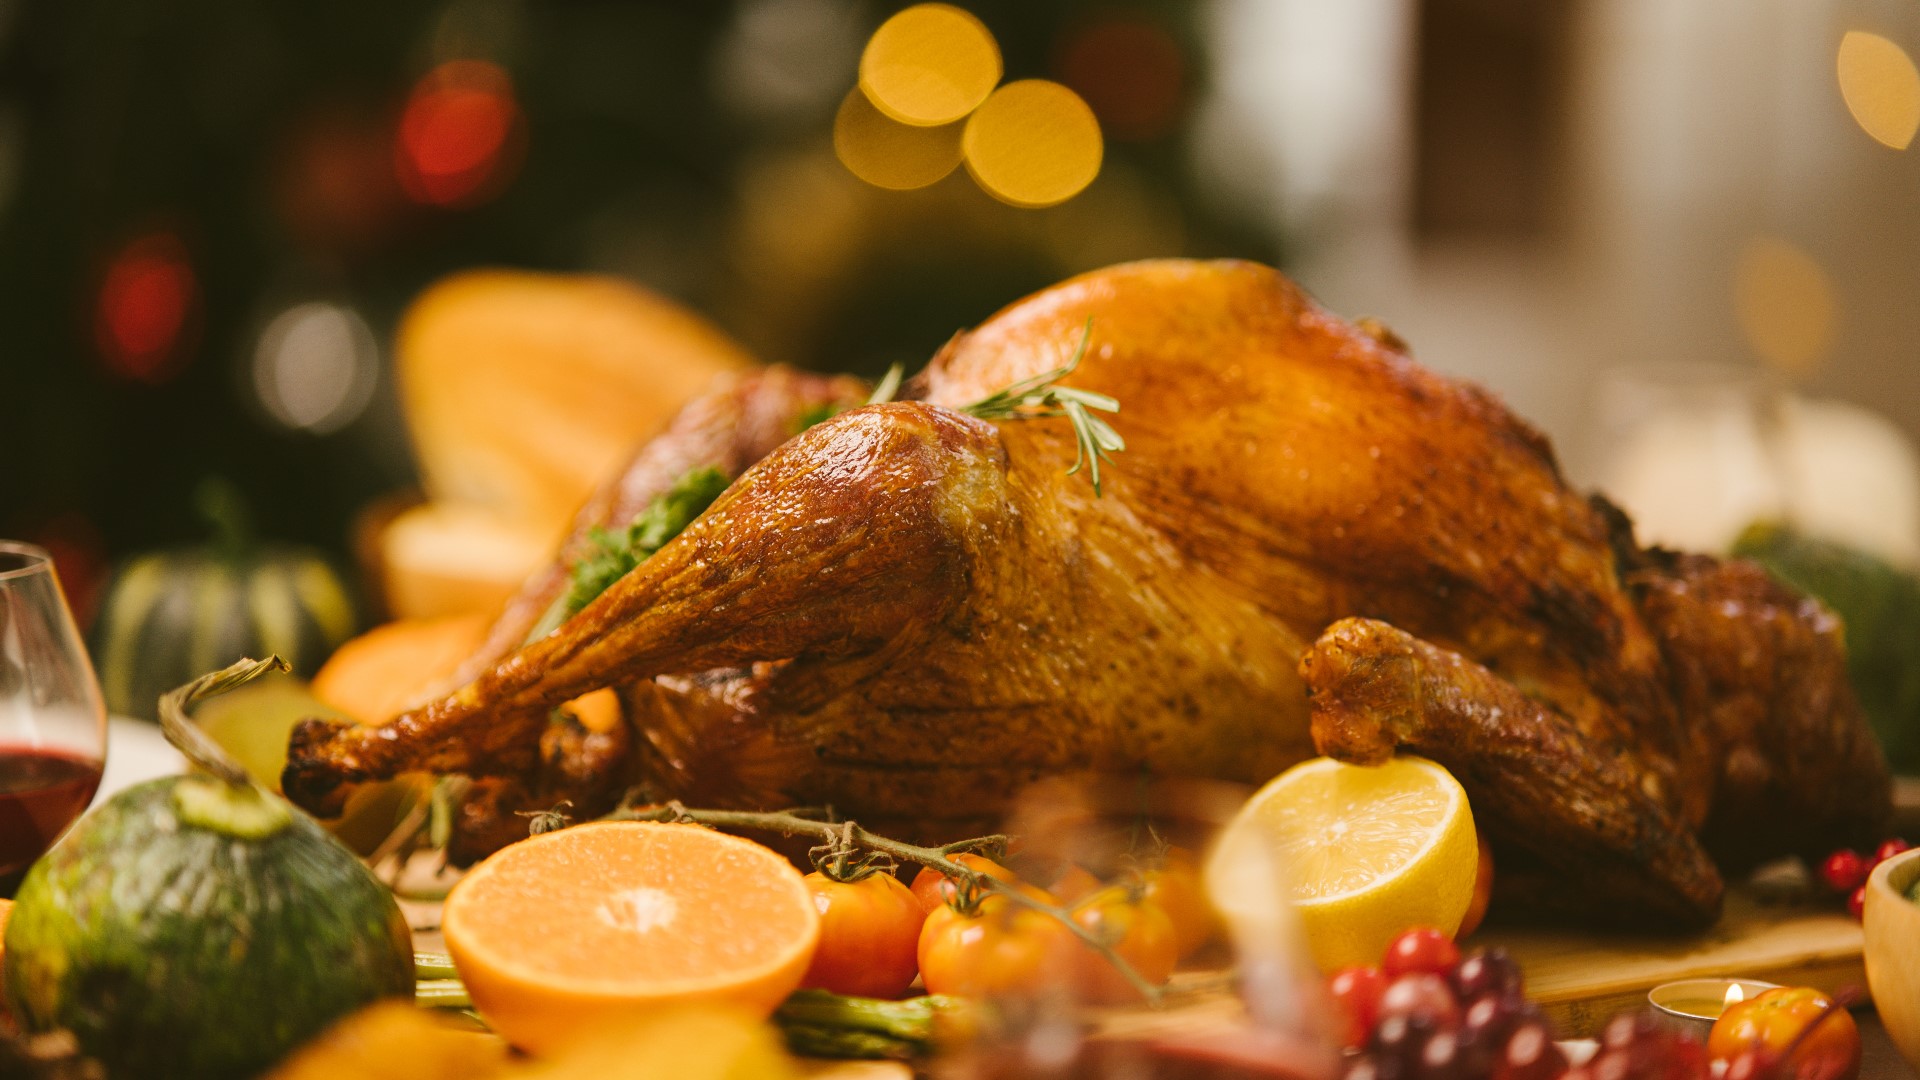 The American Farm Bureau says the average cost of a Thanksgiving meal this year is $53.31, which is up 14% over last year.